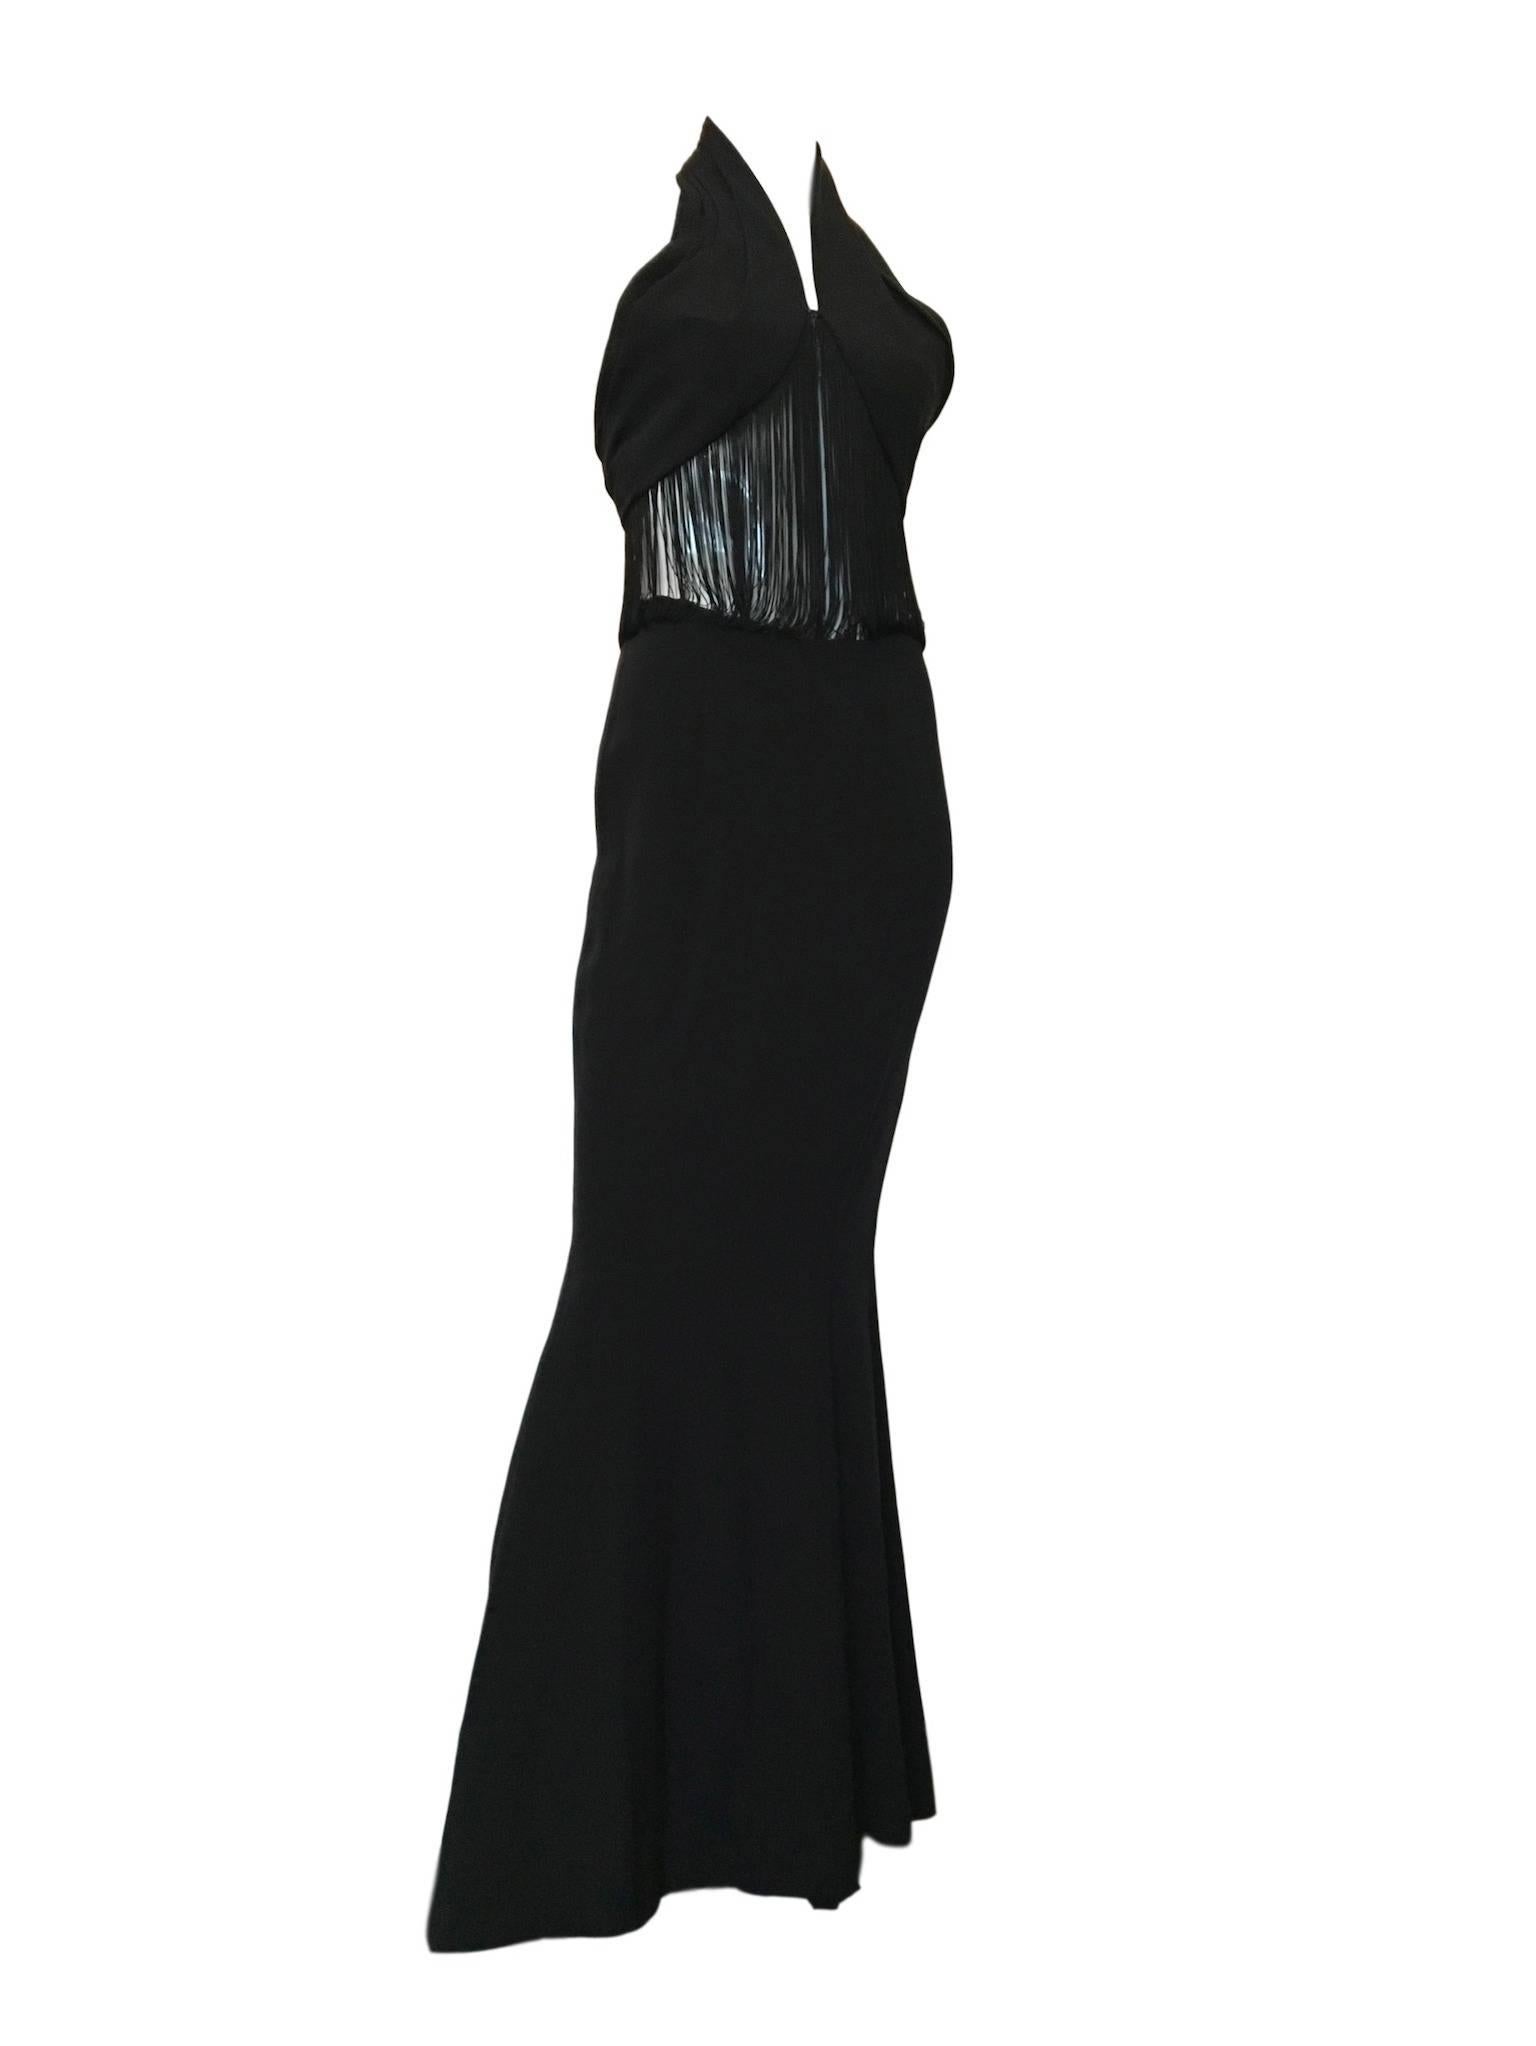 1980s Vintage Black Halter Mermaid Fishtail Cocktail Evening Dress Greg Snyder In Excellent Condition In Portsmouth, Hampshire